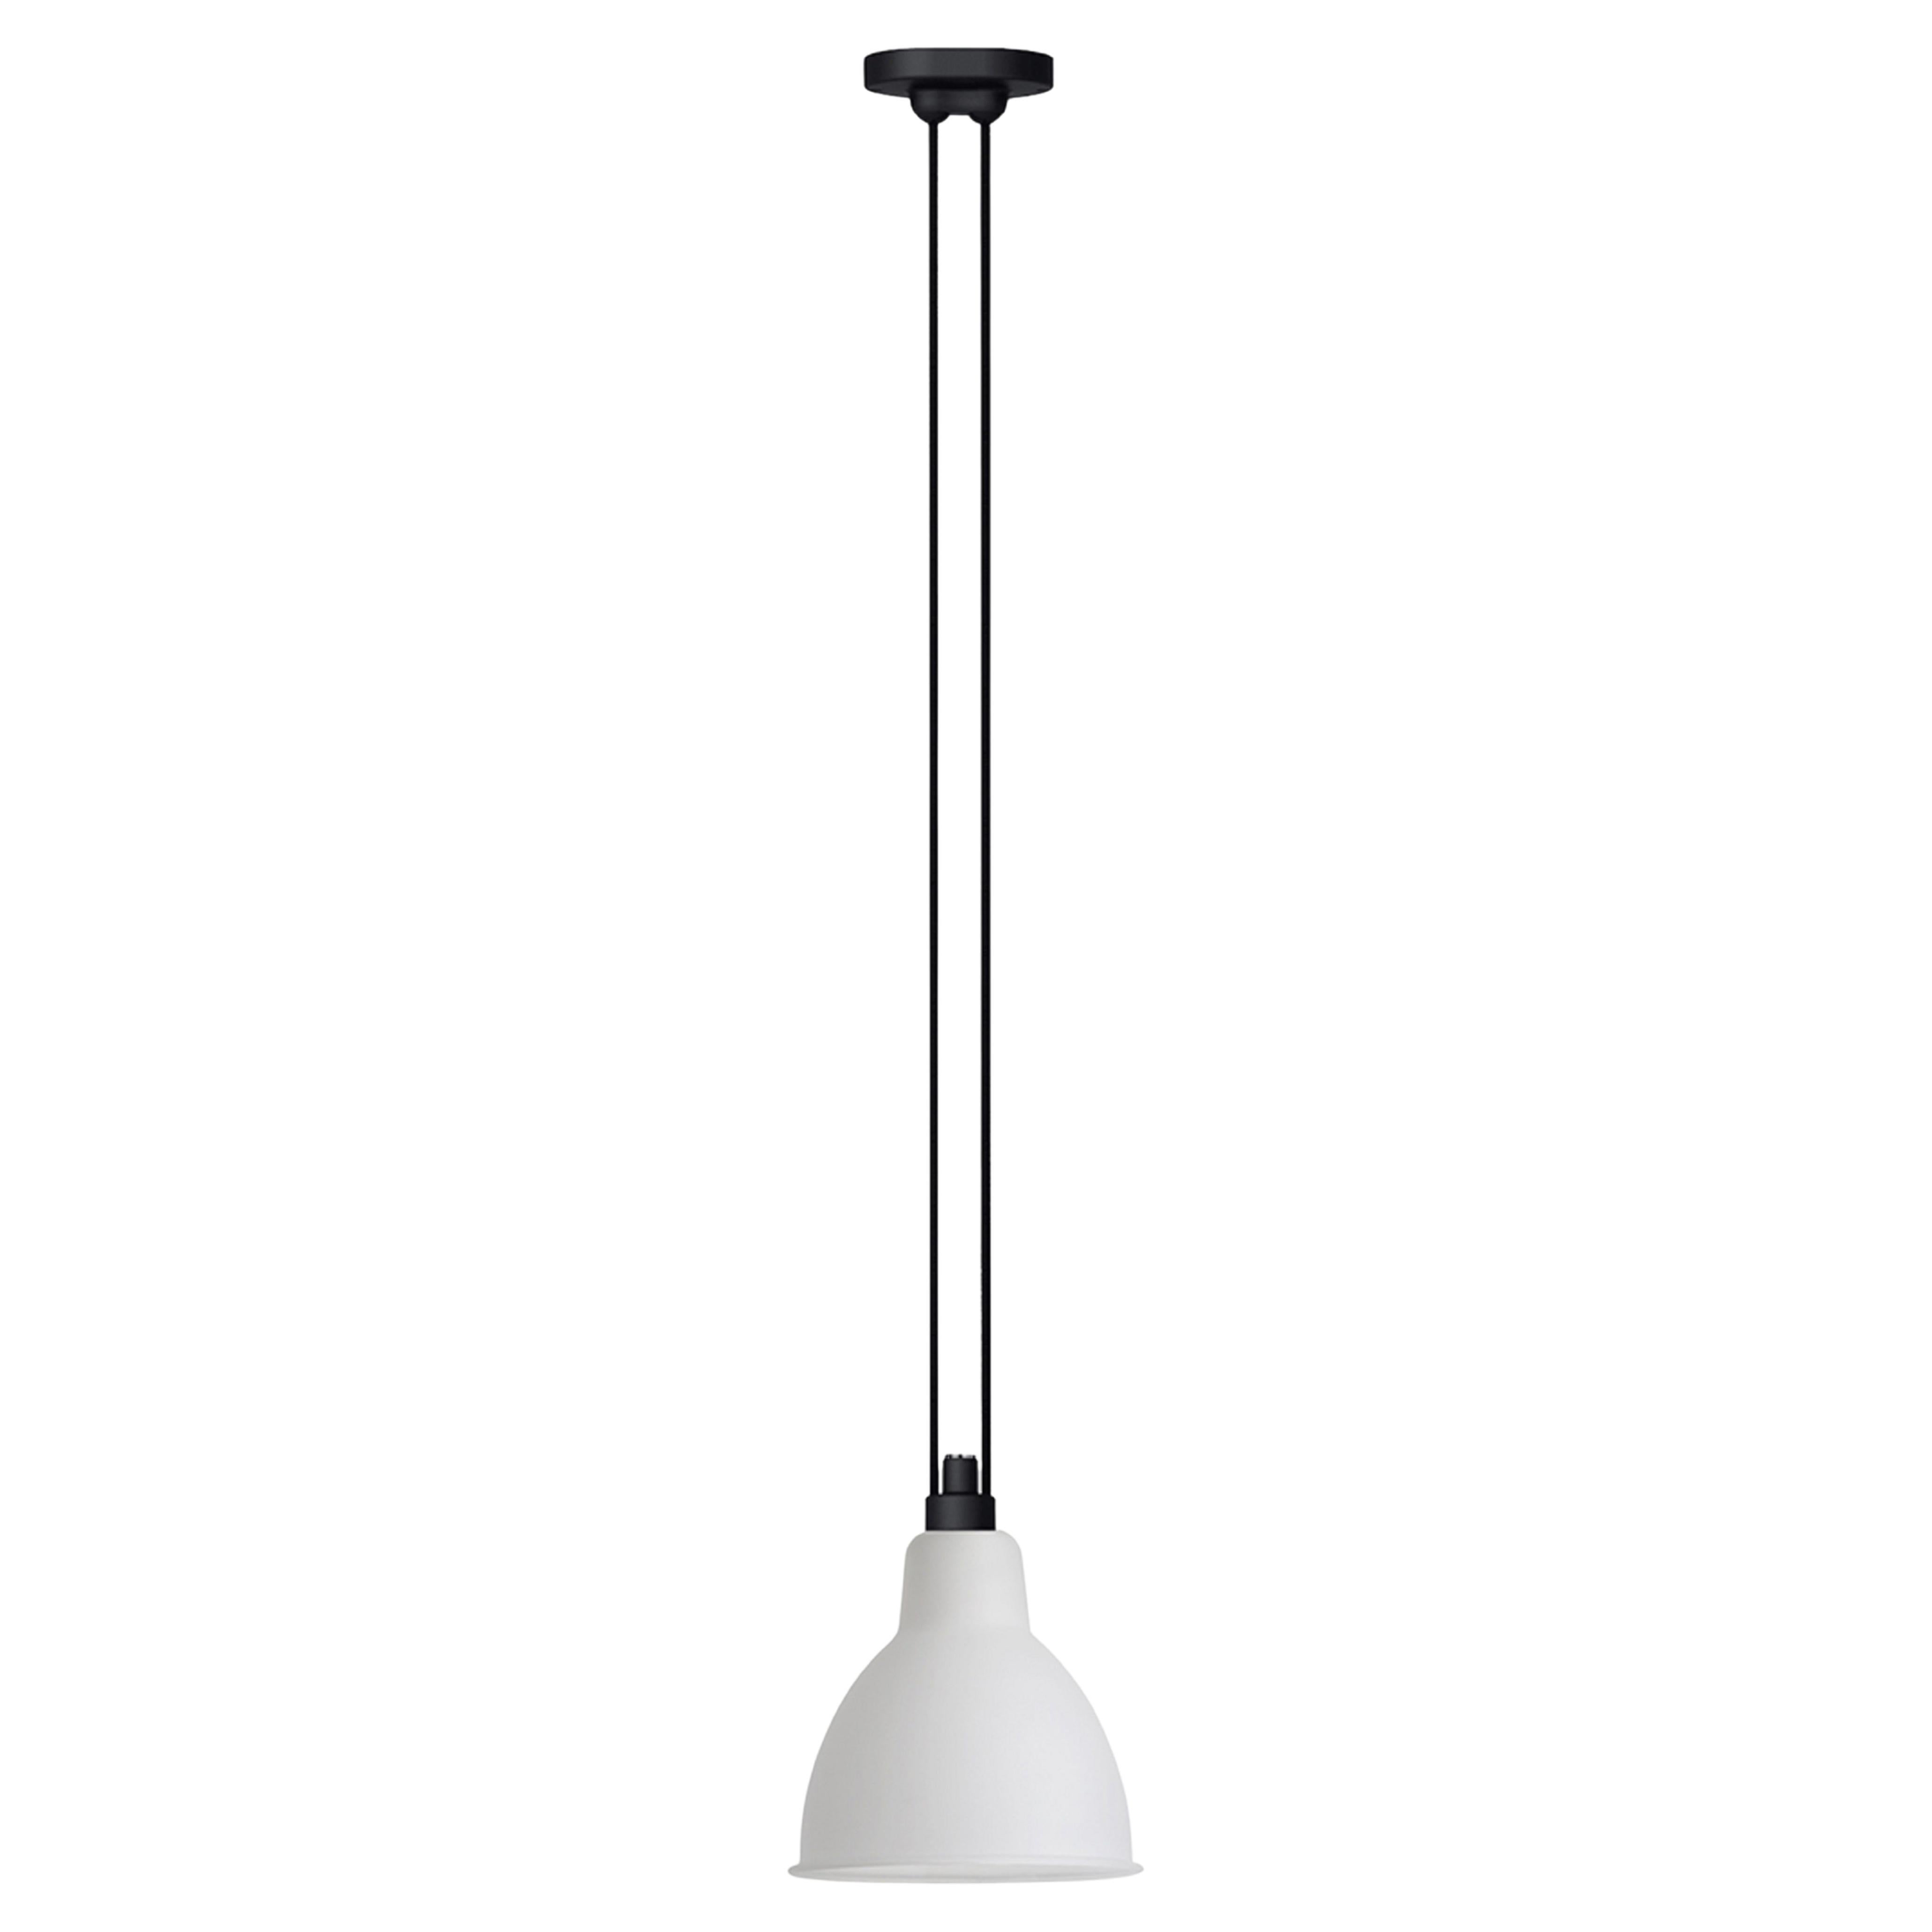 DCW Editions Les Acrobates Nº322 Large Round Pendant Lamp in Frosted Glass Shade